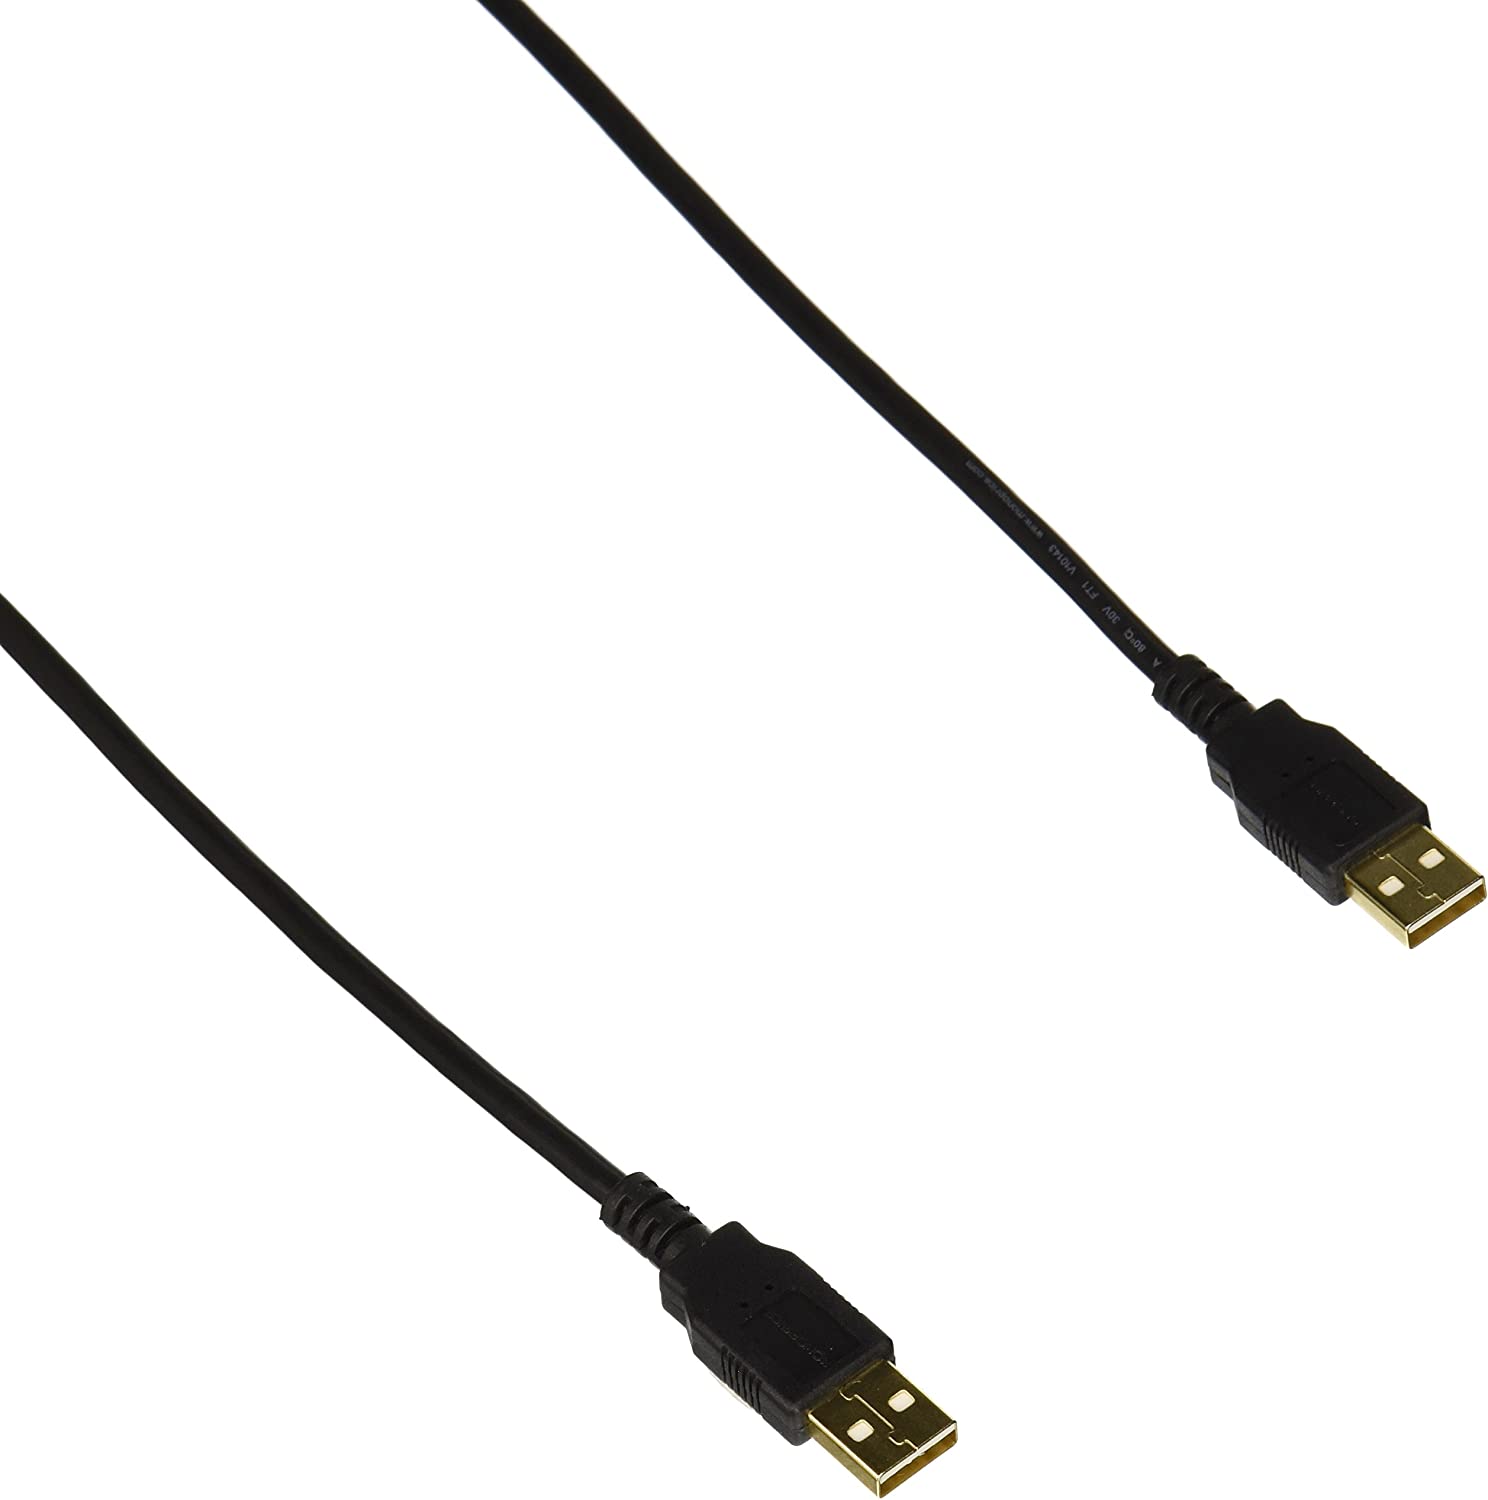 Monoprice 6ft USB 2.0 A Male to A Male 28/24AWG Cable (Gold Plated) - Blackfor Data Transfer Hard Drive Enclosures, Printers, Modems, Cameras and More!